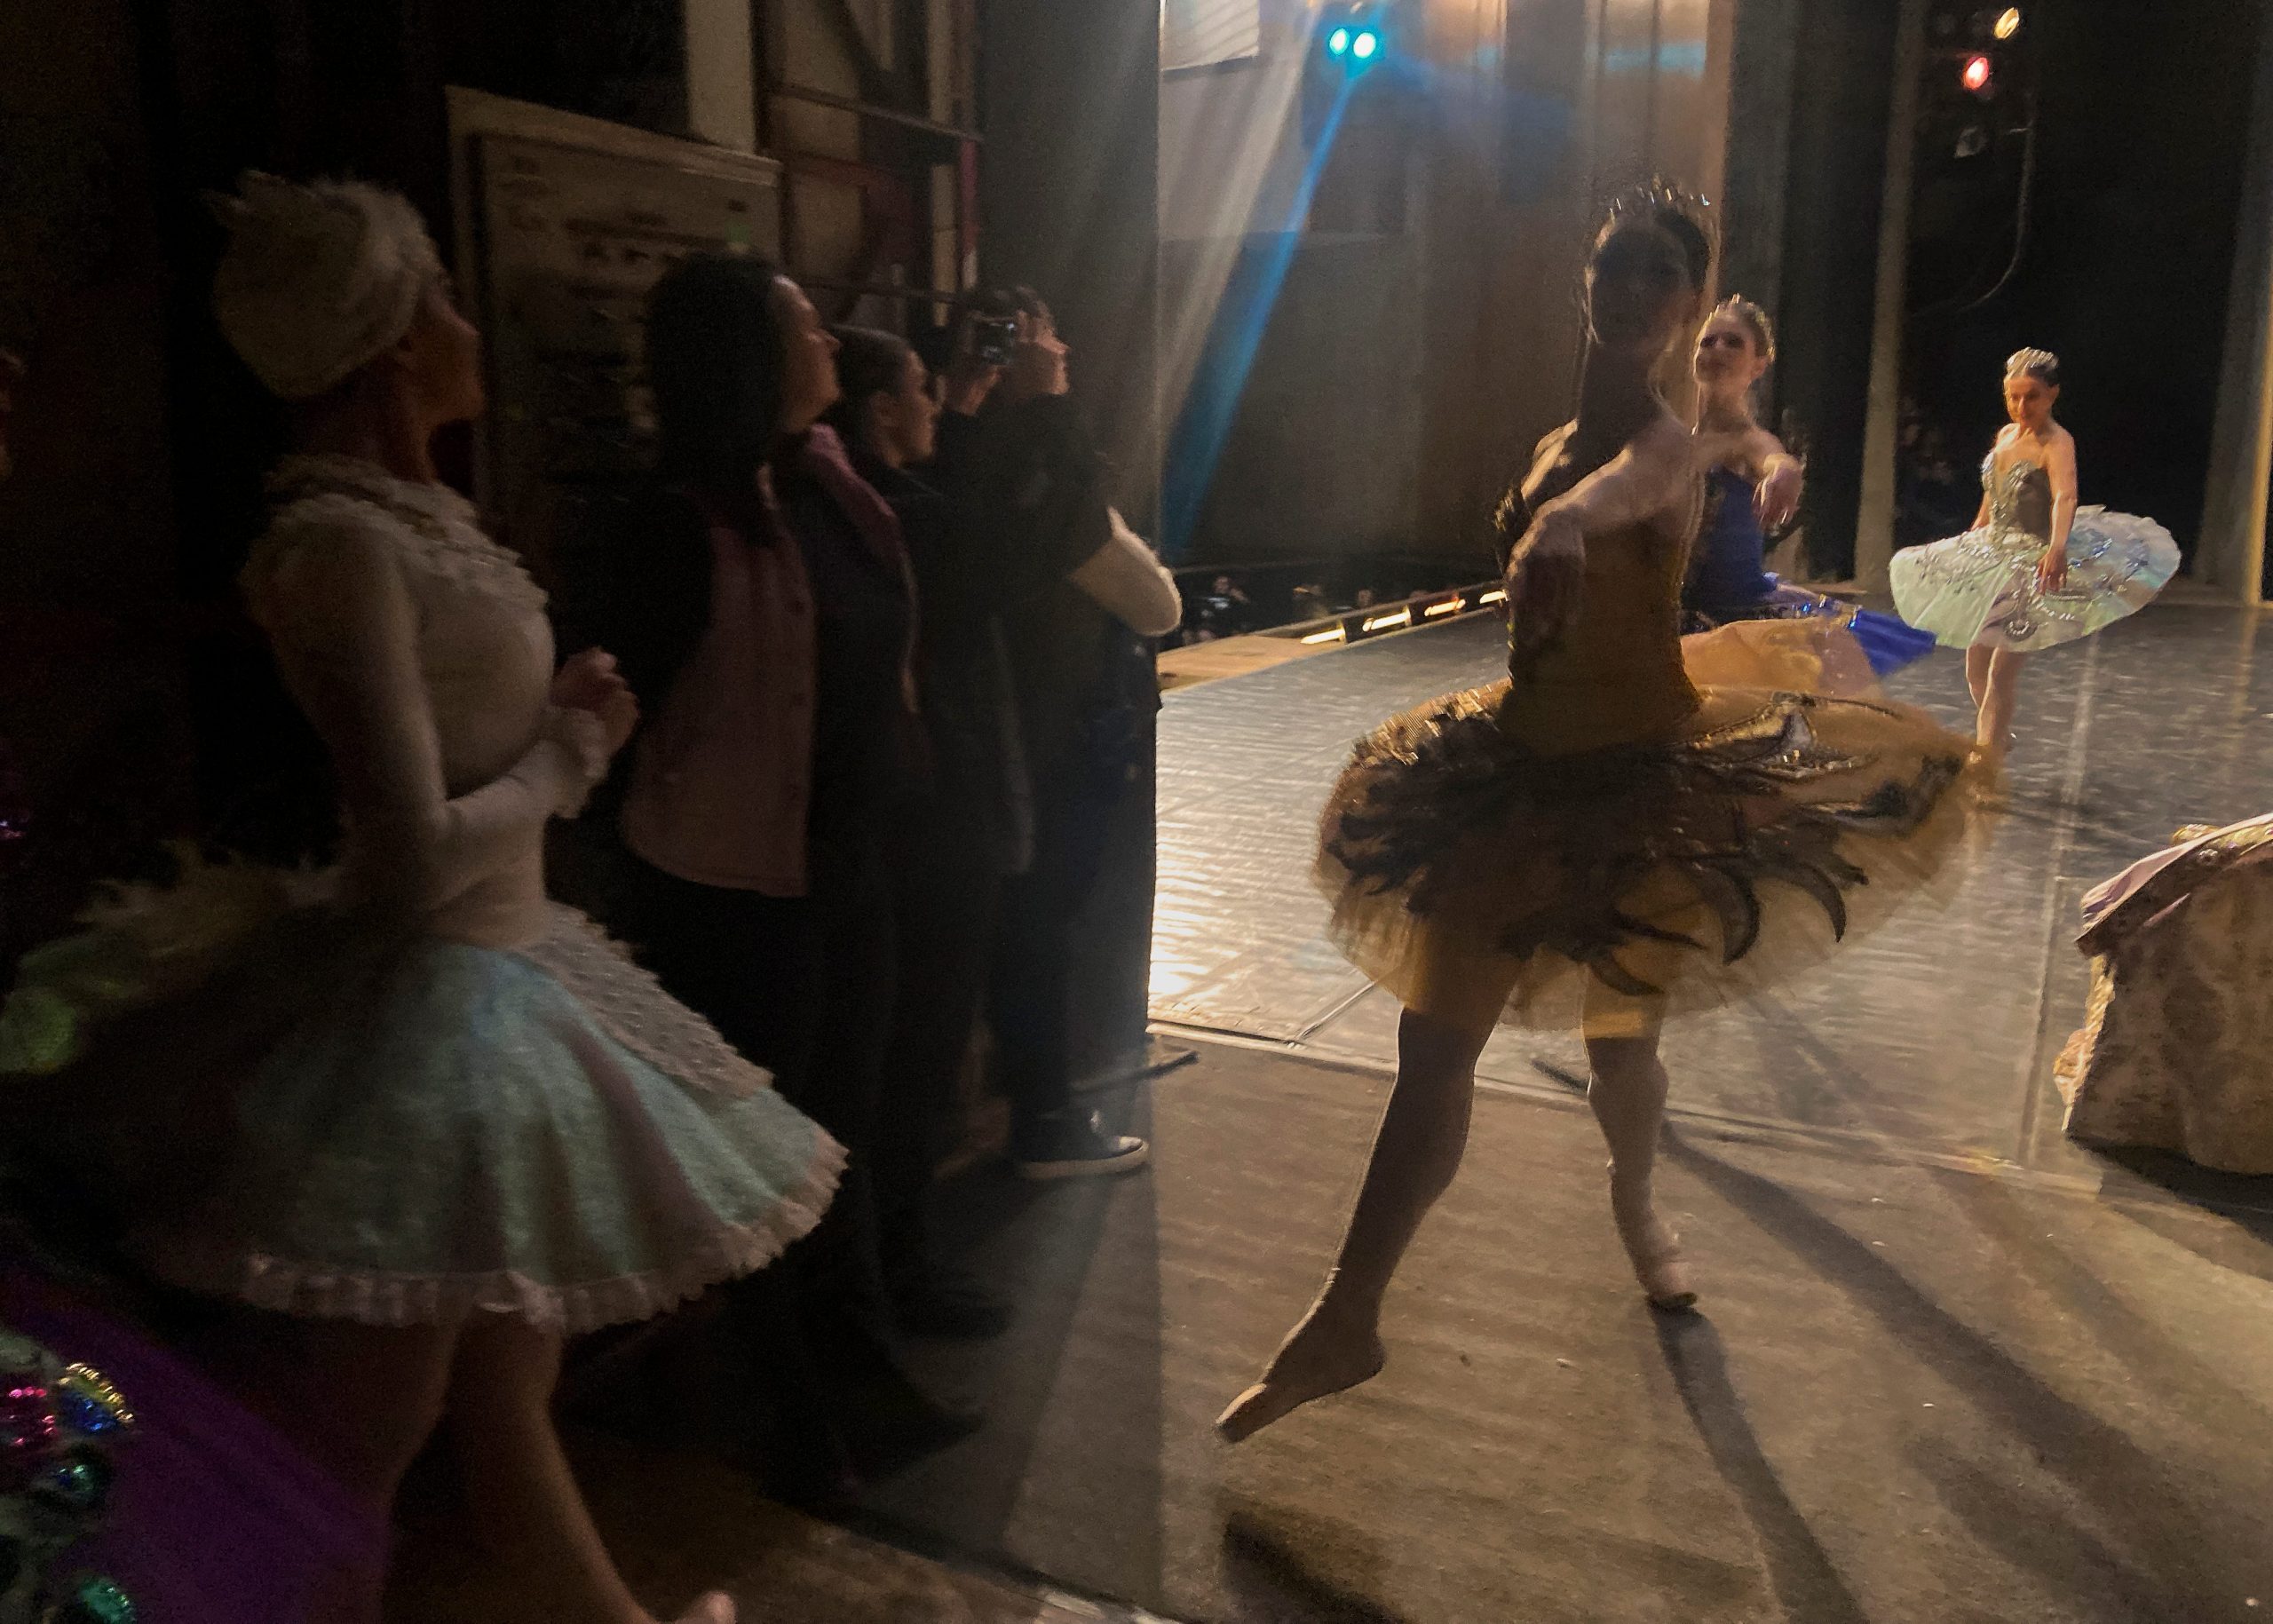 Ballet dancers are seen from backstage.